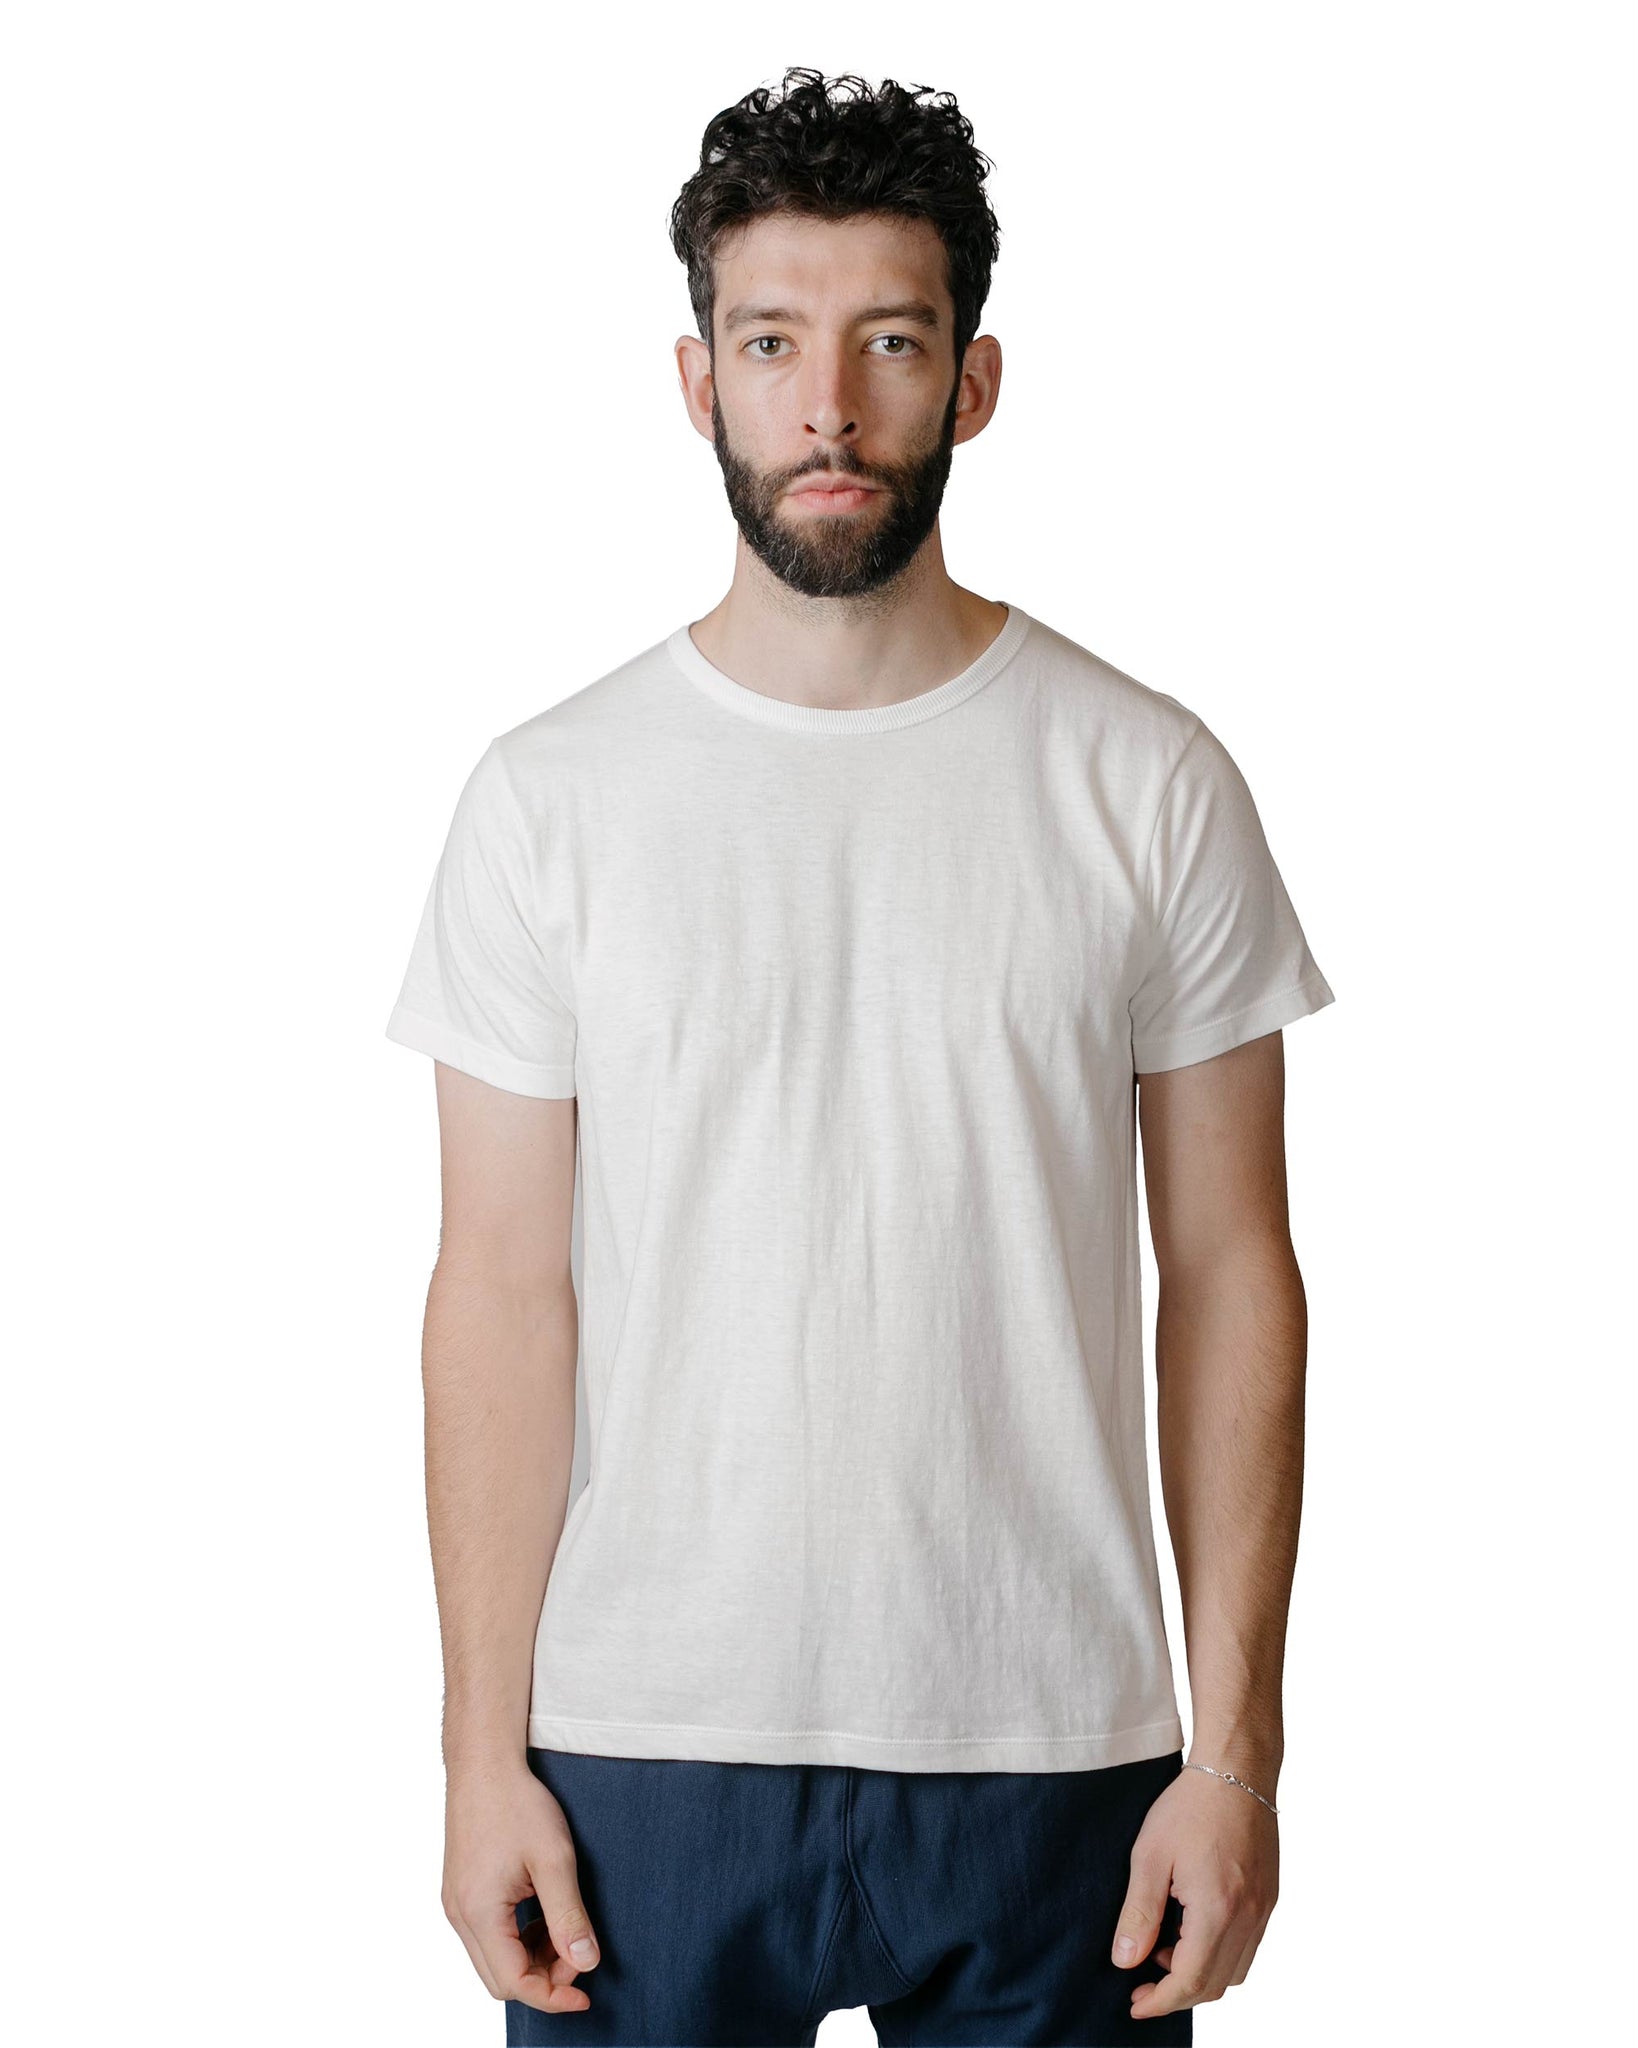 The Real McCoy's MC17005 Undershirts, Cotton, Summer White Model Front